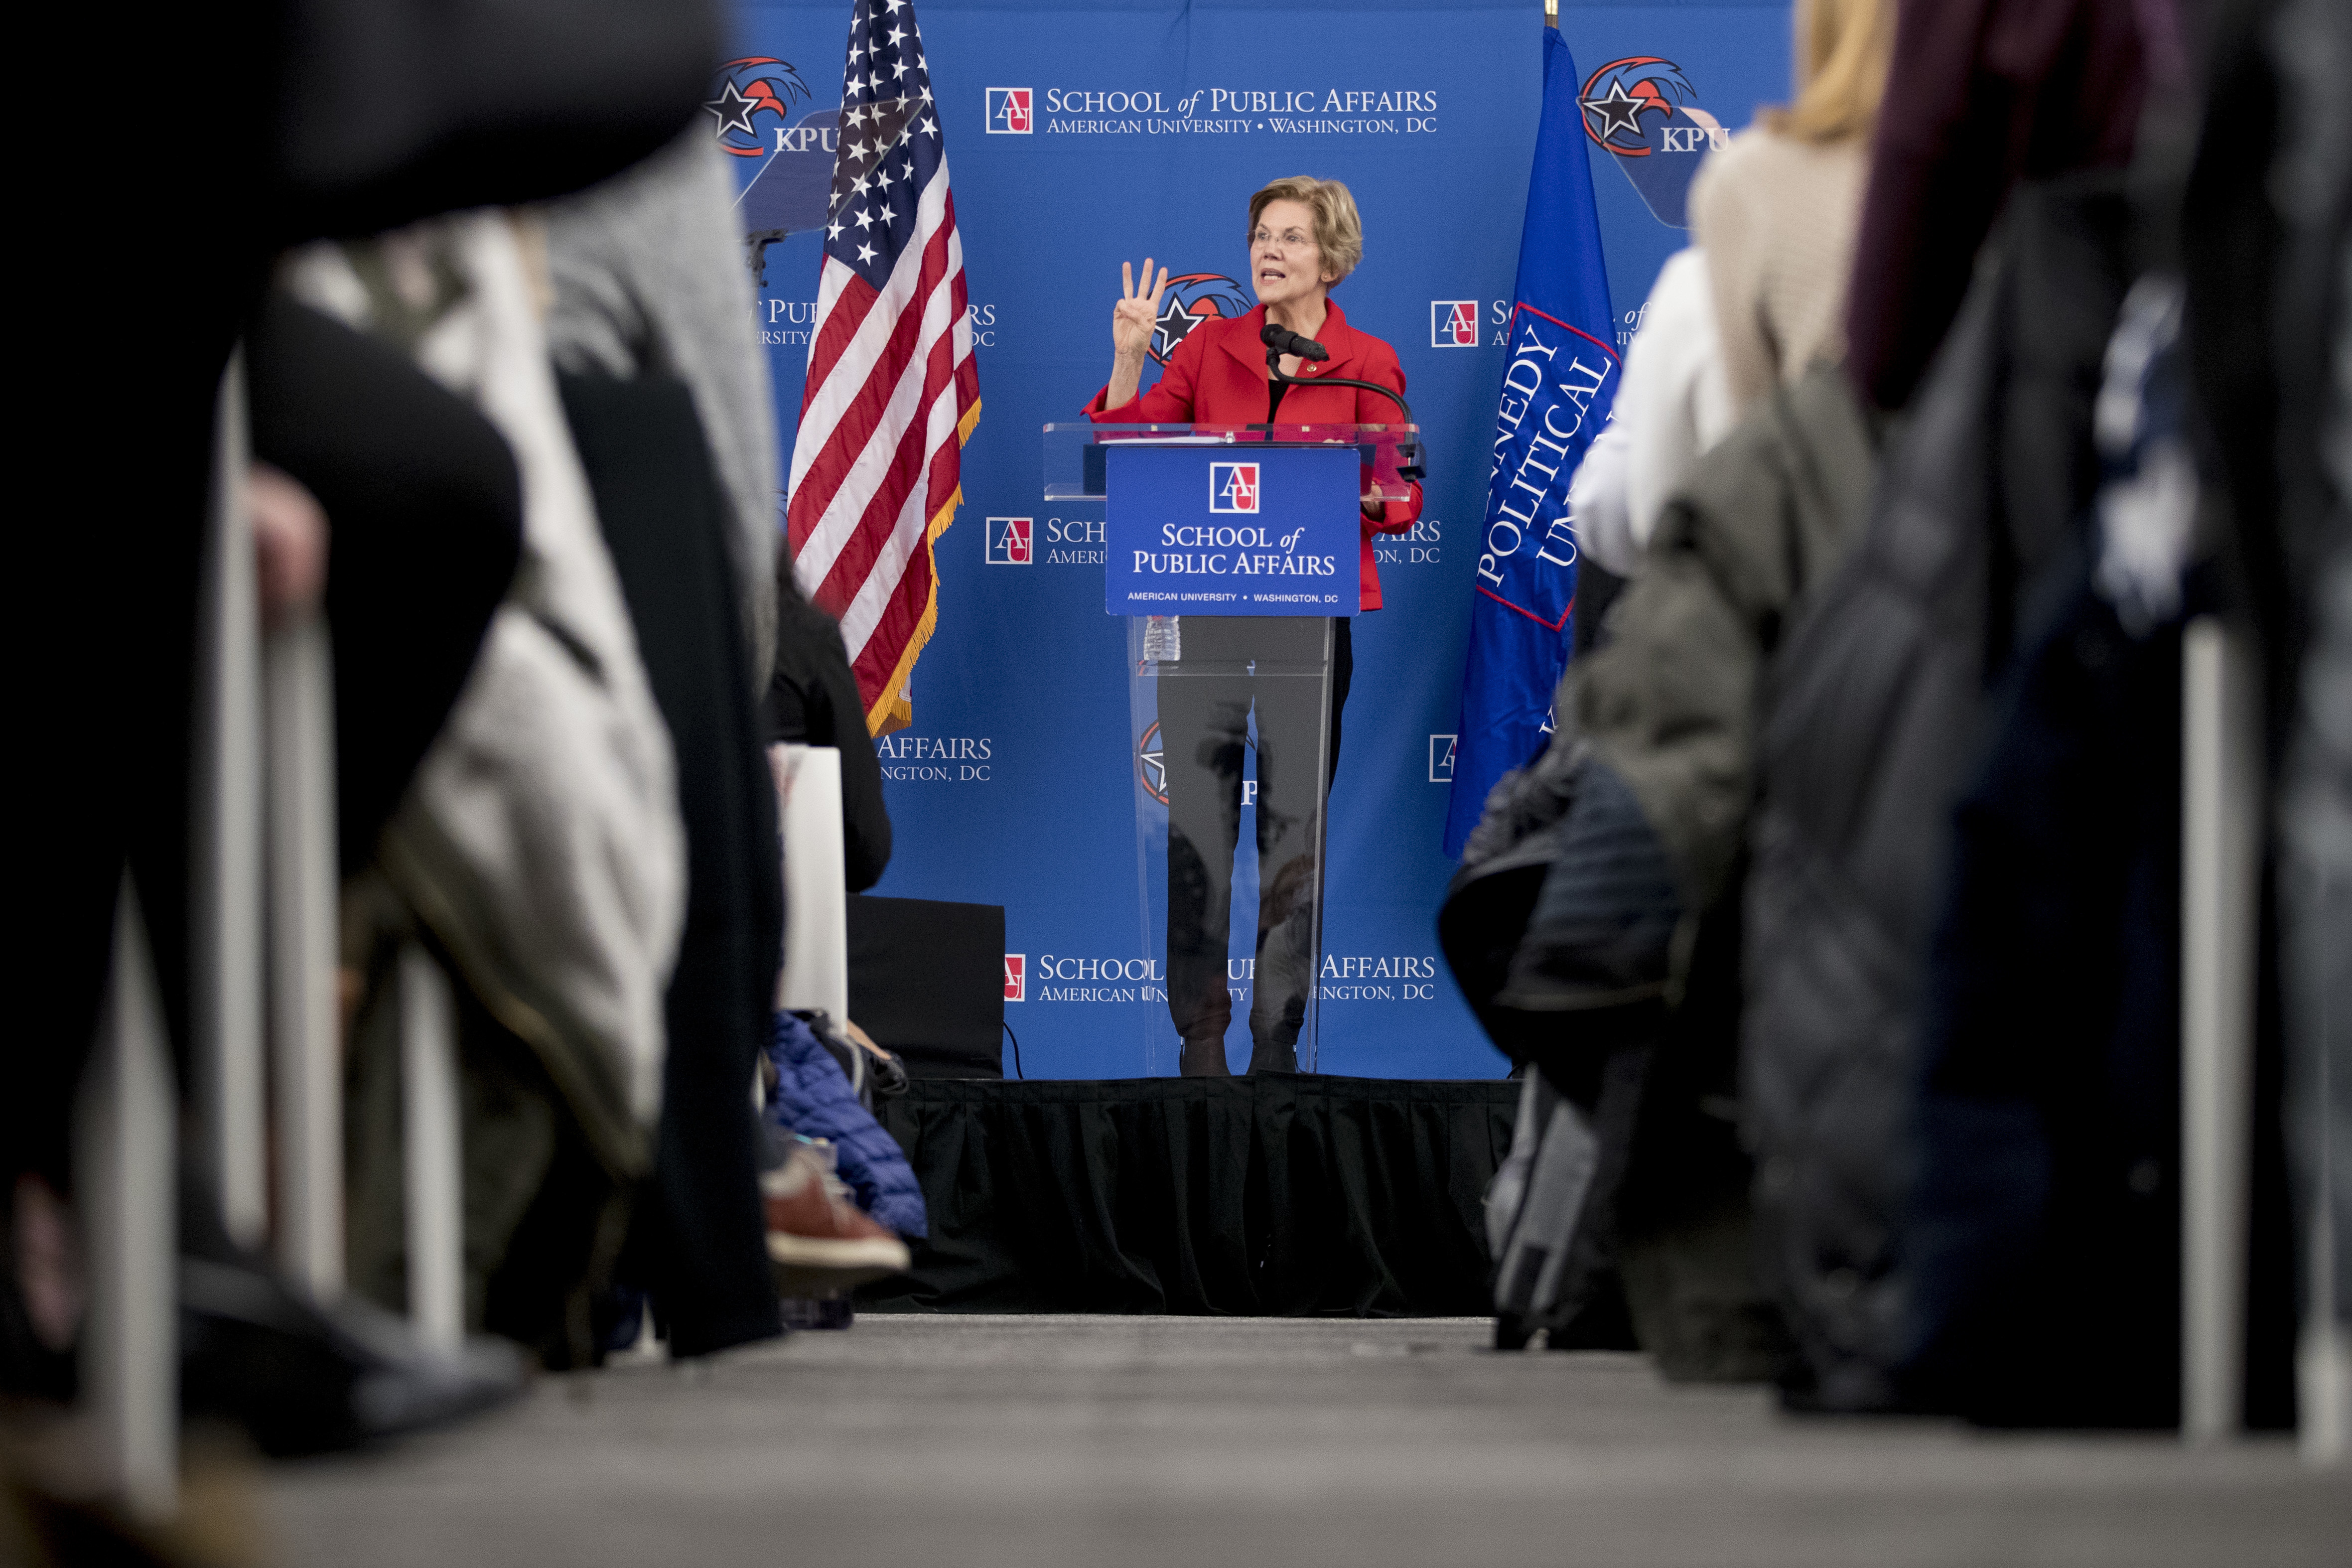 Warren tackles race following criticism of DNA test release